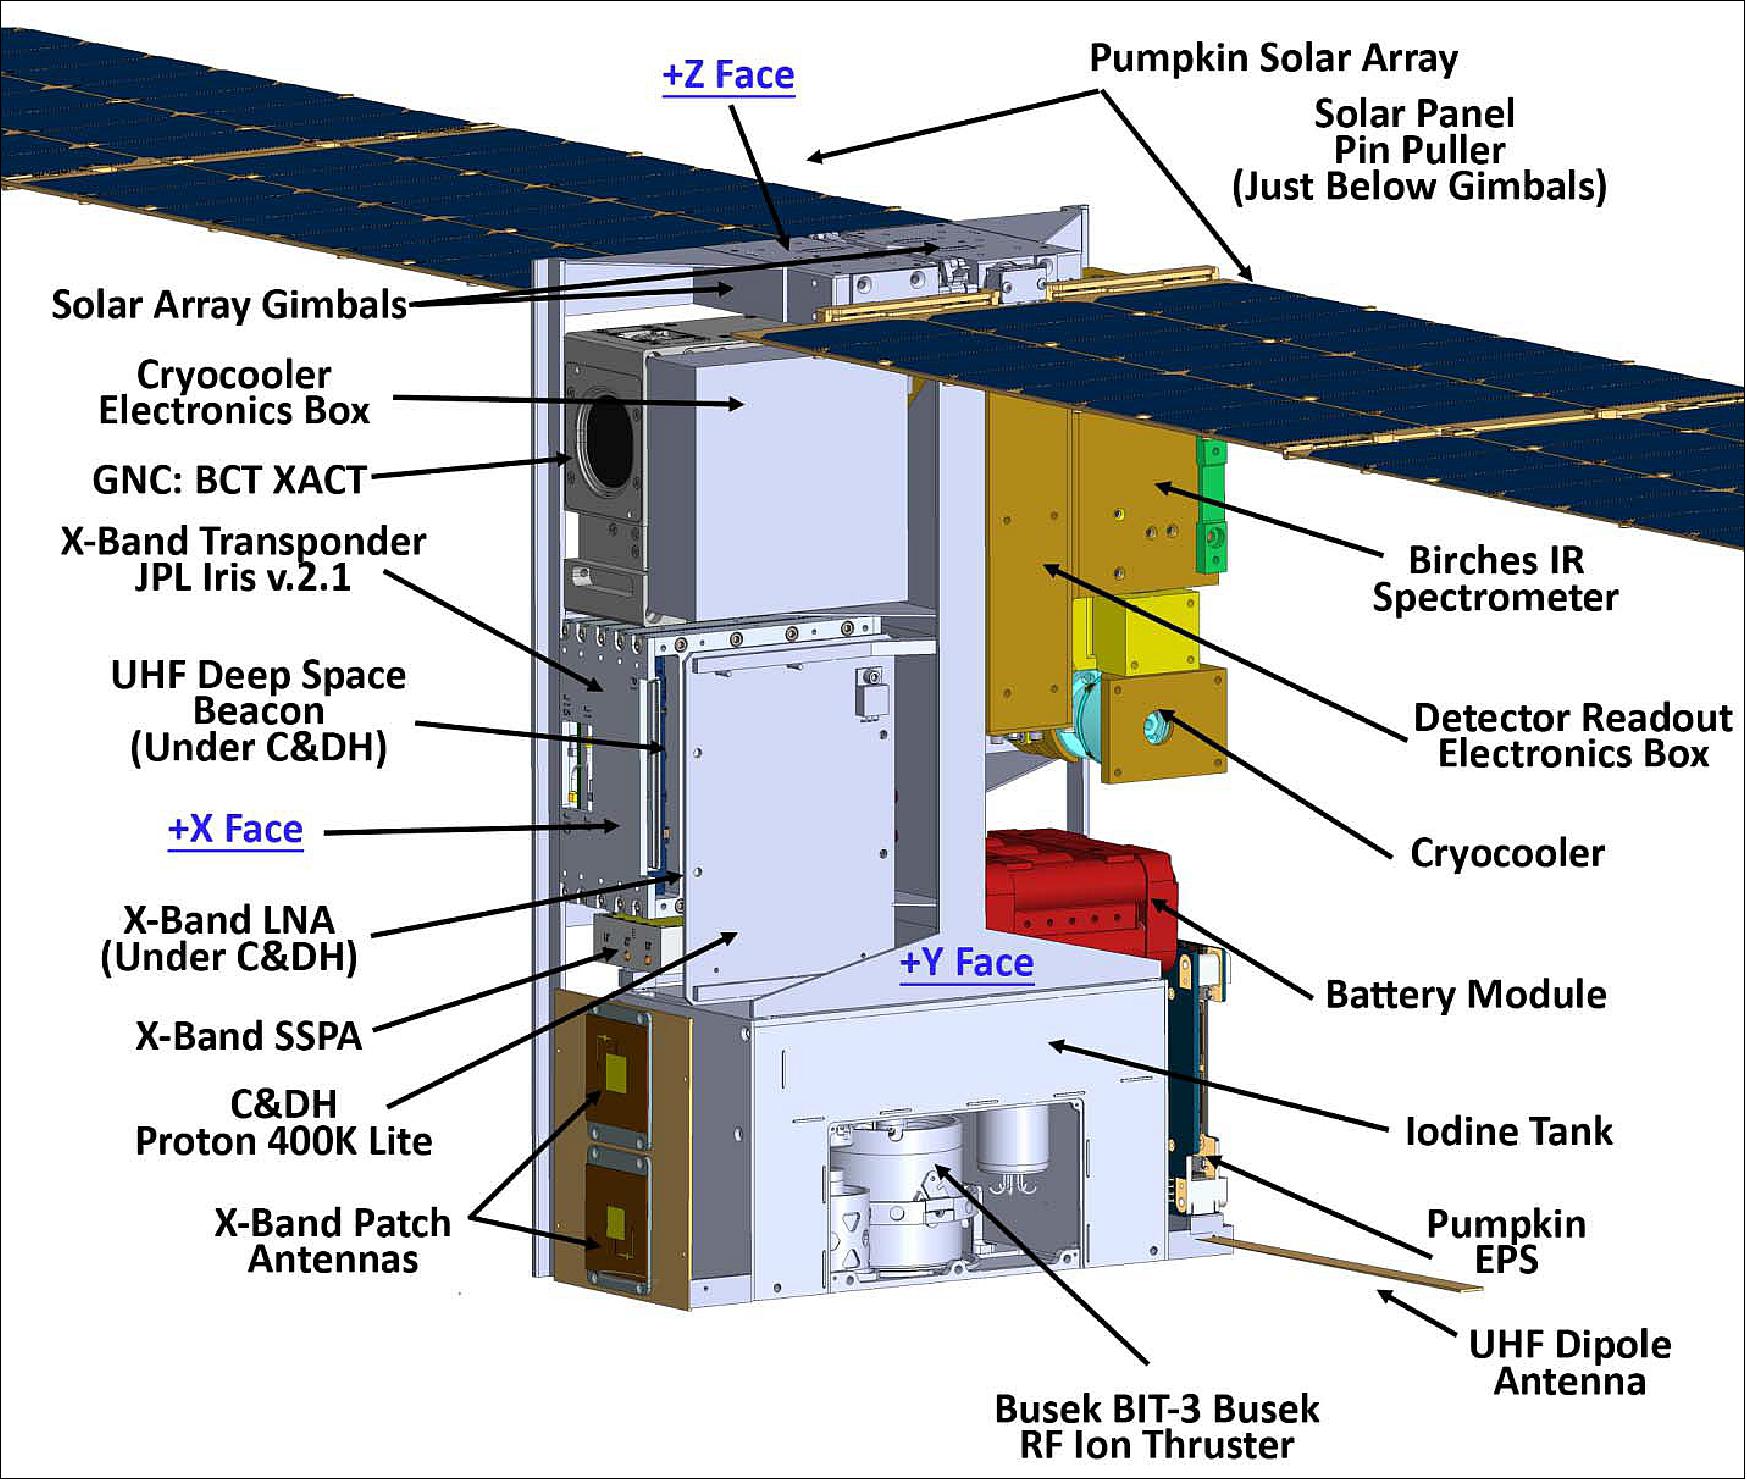 Figure 2: Layout of the Lunar IceCube with sample science payload (image credit: MSU)